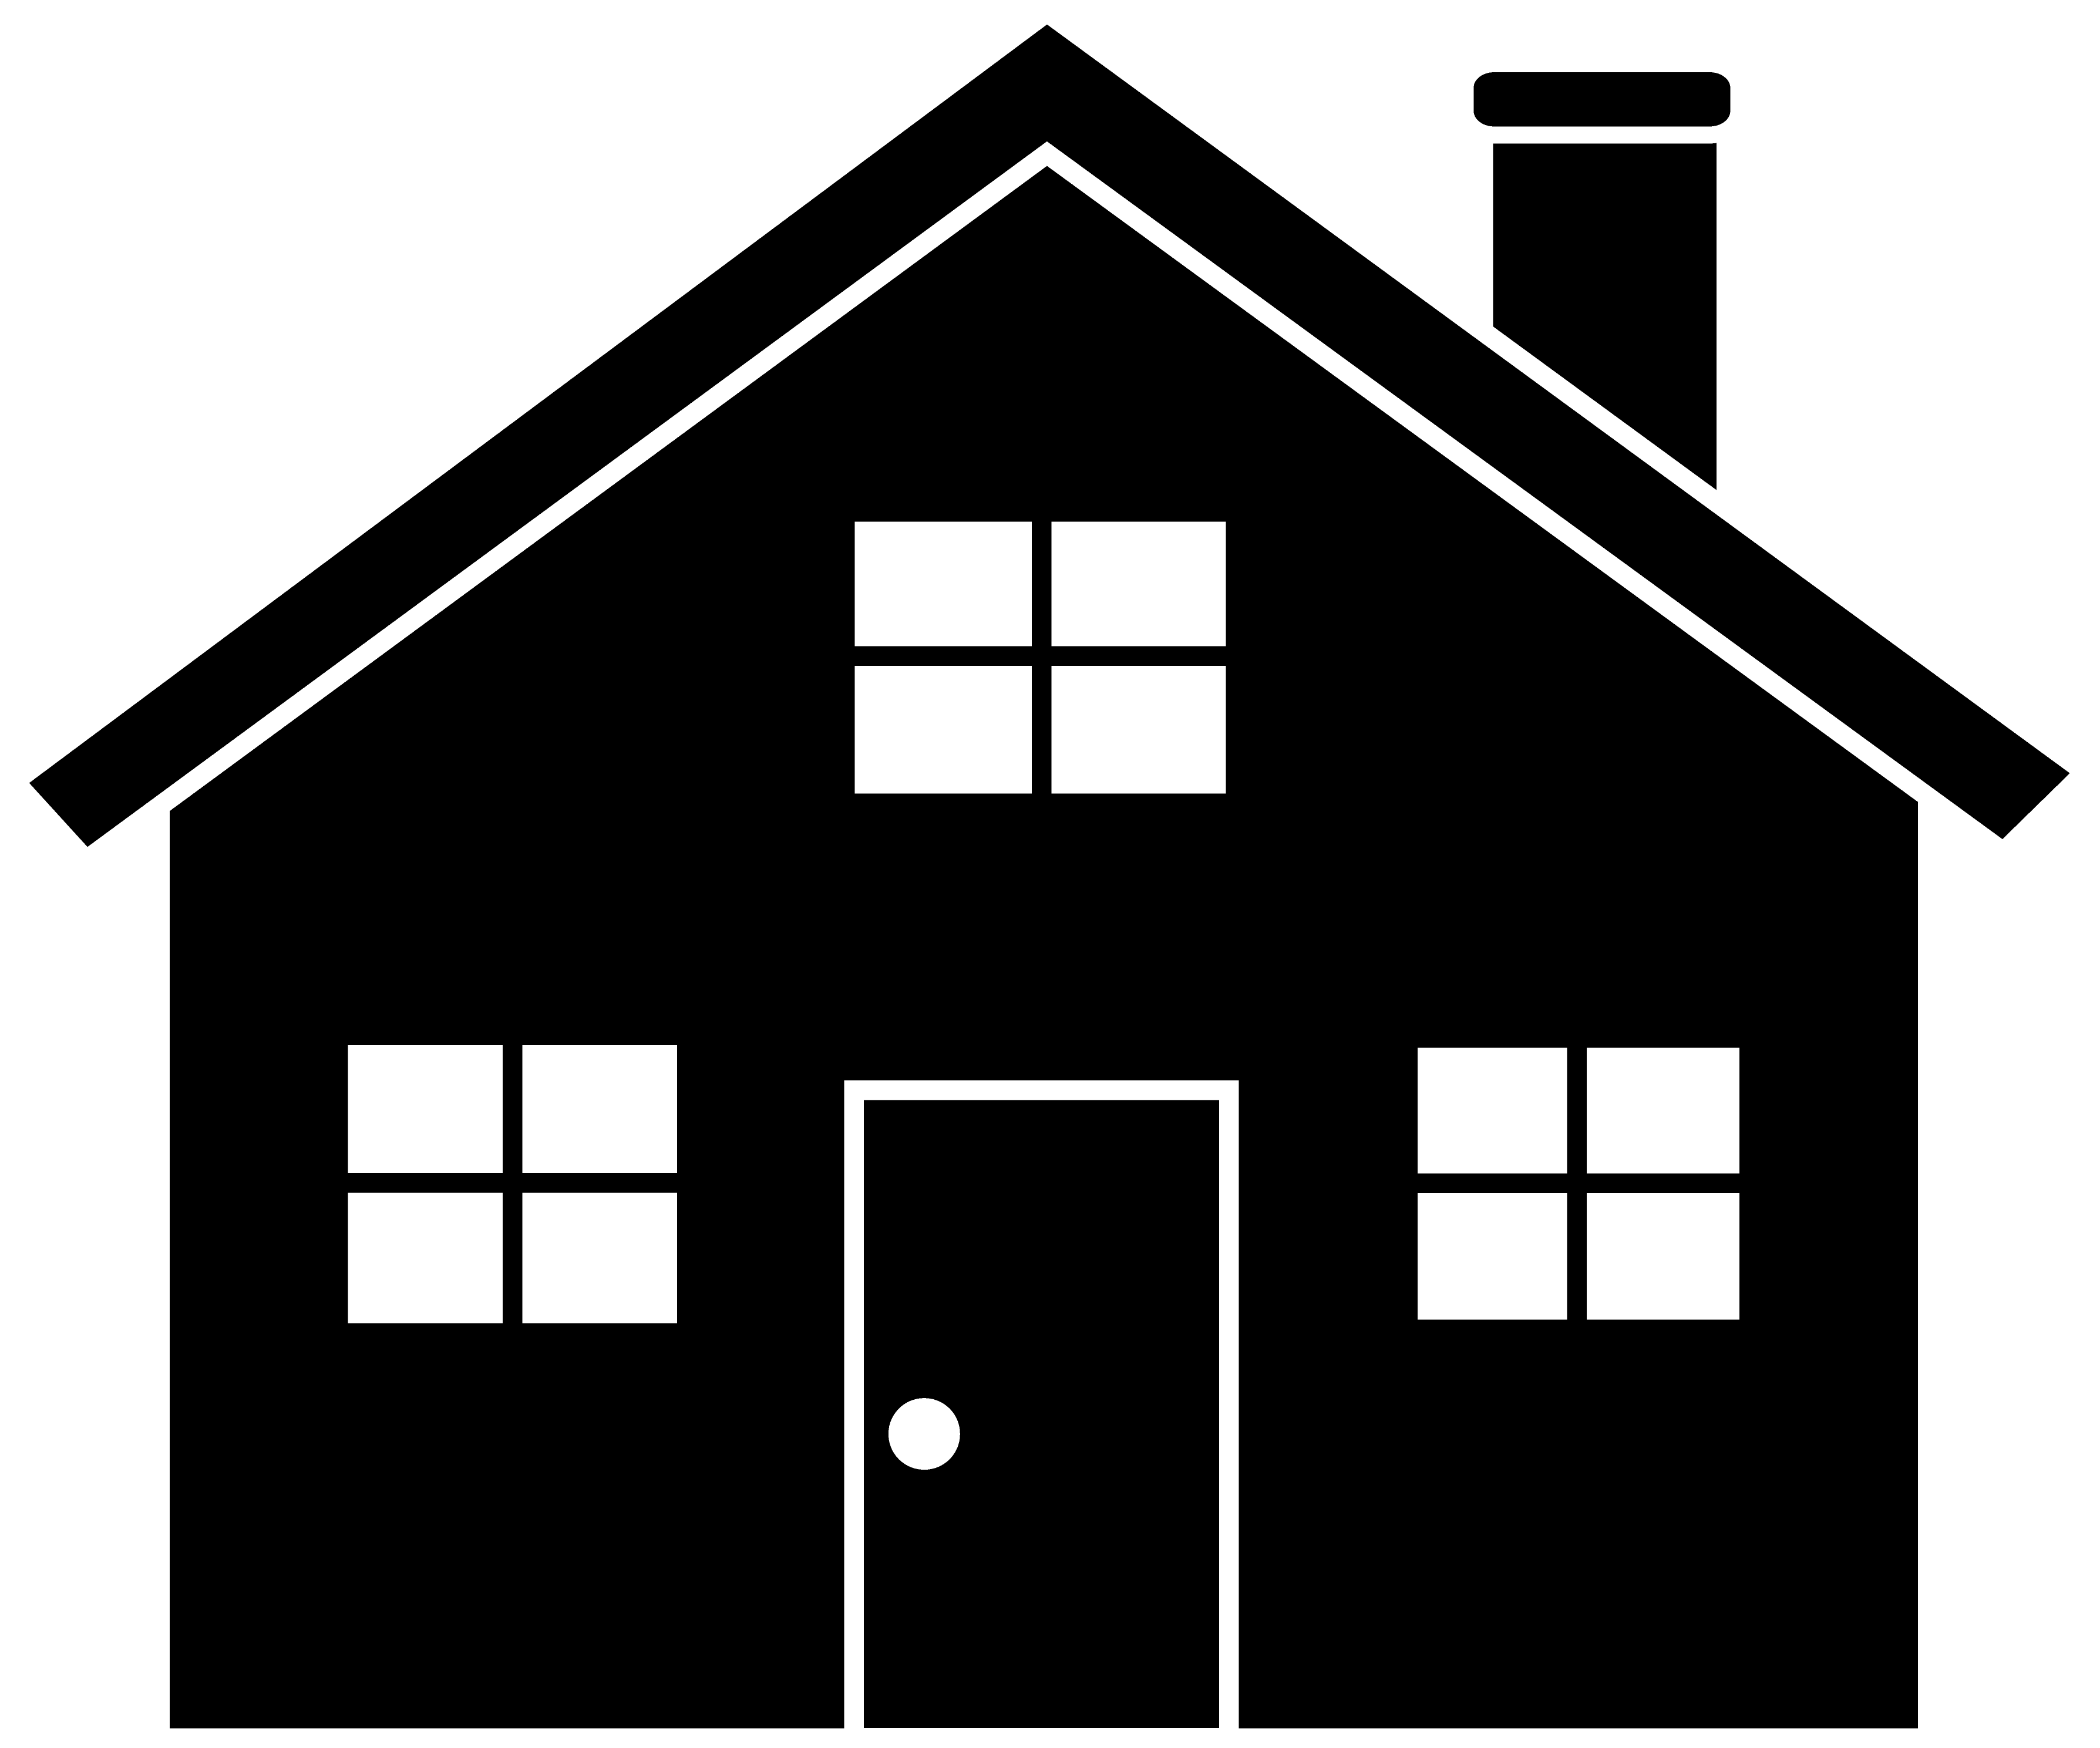 Clipart home. Image of house black